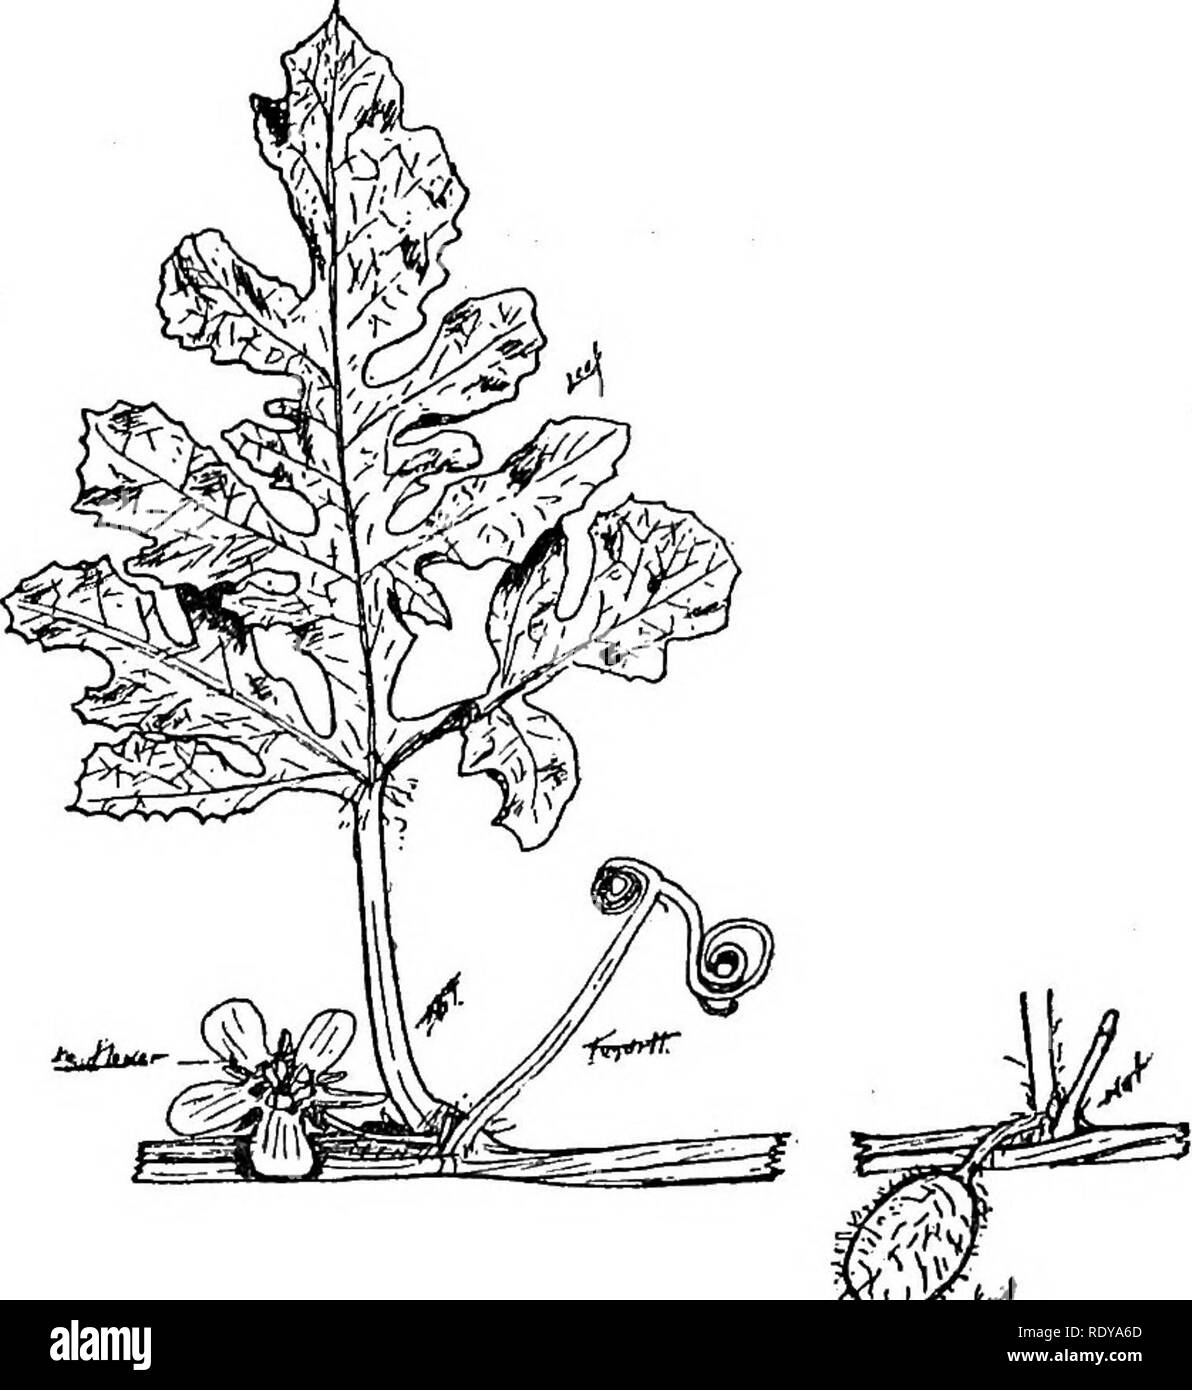 . A manual of poisonous plants, chiefly of eastern North America, with brief notes on economic and medicinal plants, and numerous illustrations. Poisonous plants. 748 MANUAL OF POISONOUS PLANTS mon in the Rocky Mountains and frequently cultivated. The snowberry (5&quot;. racemosus) is common in rocky woods, and abundant along river course from Minnesota to Arkansas and westward. Symphoricarpos orbiculatus Moench. Indian Currant. Coralberry A shrub 2-4 feet high, purplish, usually pubescent, branches; leaves oval or ovate entire or undulate, nearly glabrous above, pubescent underneath; flowers  Stock Photo